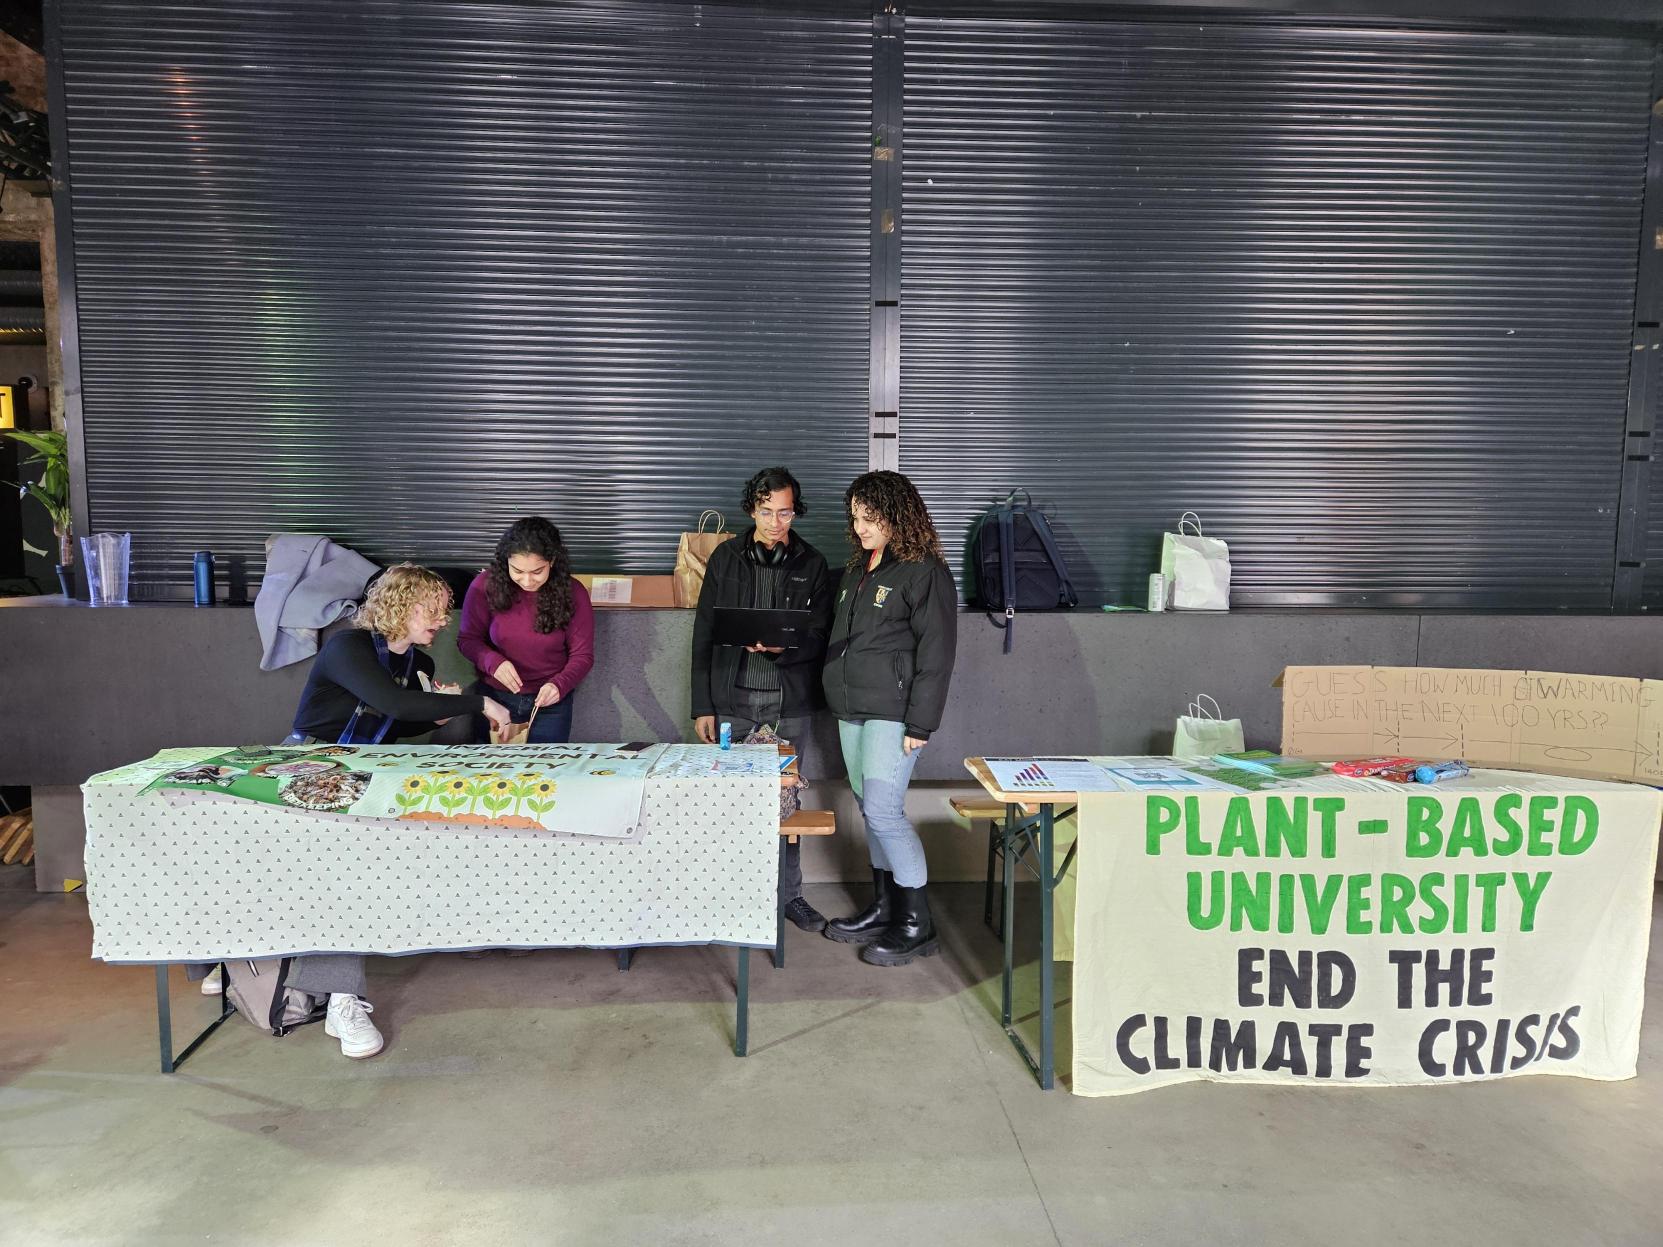 2 Tables, one has a banner over it which reads "Plant based university. End the climate crisis." There are 4 students behind the tables chatting.